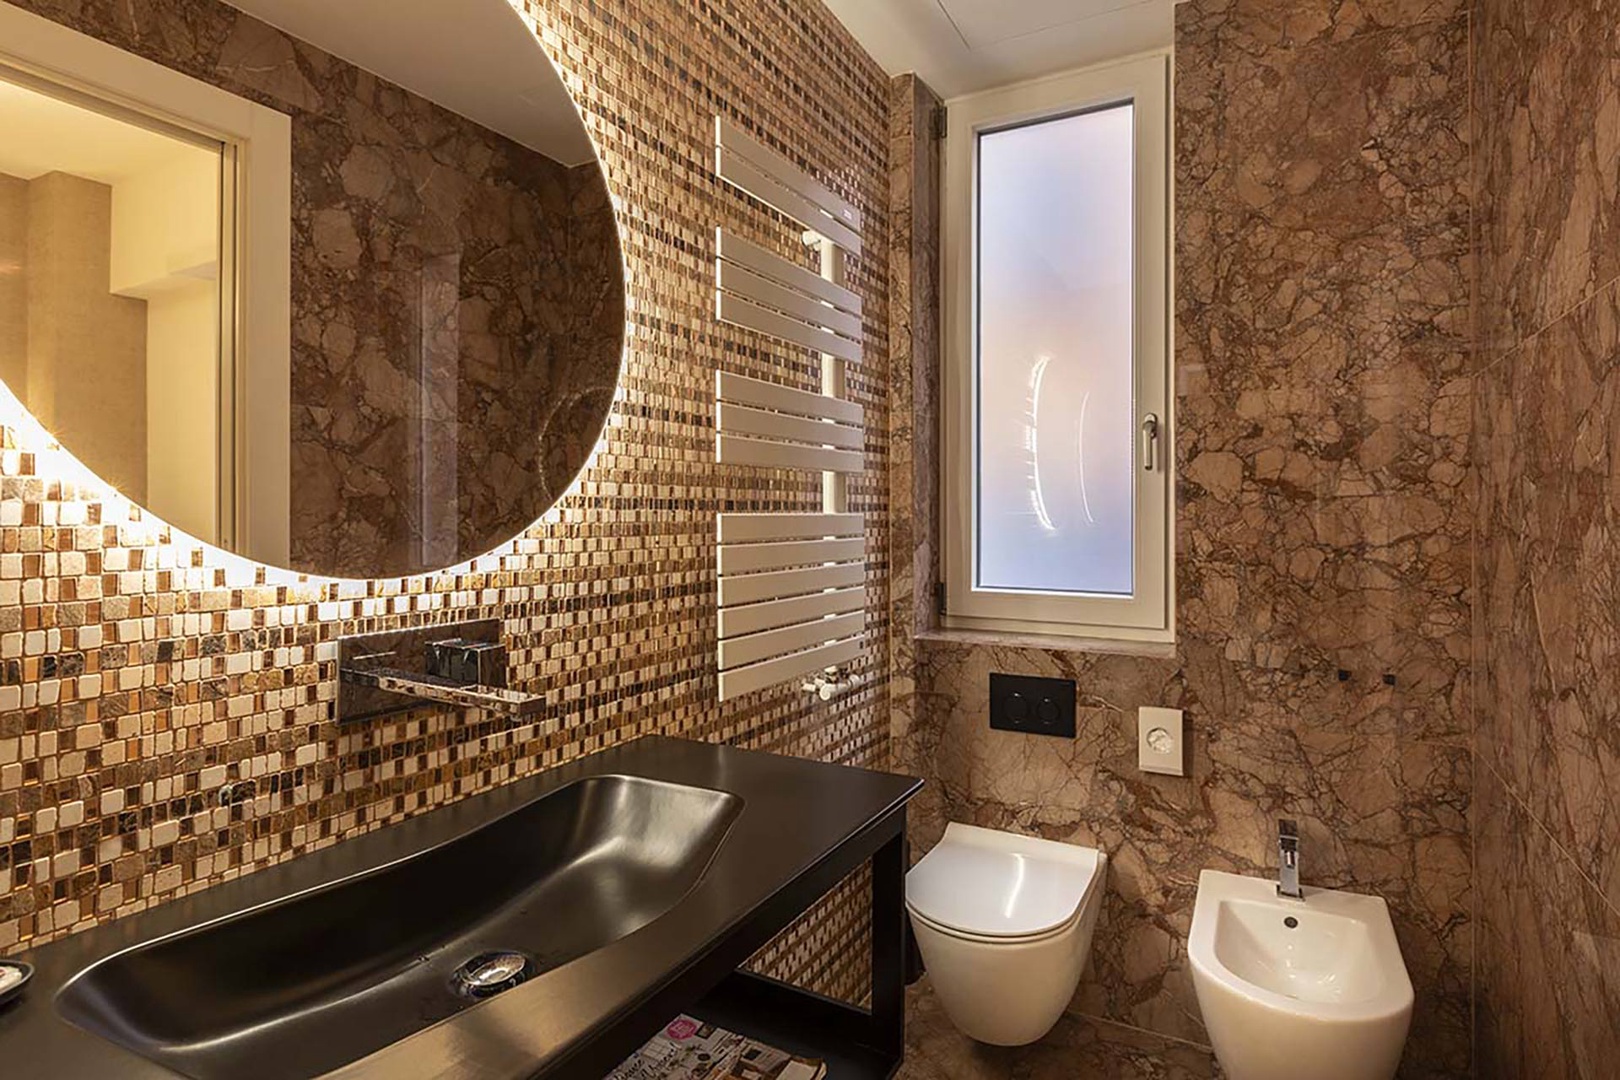 Bathroom 1 has beautiful gold inlay tiles and a steam room.